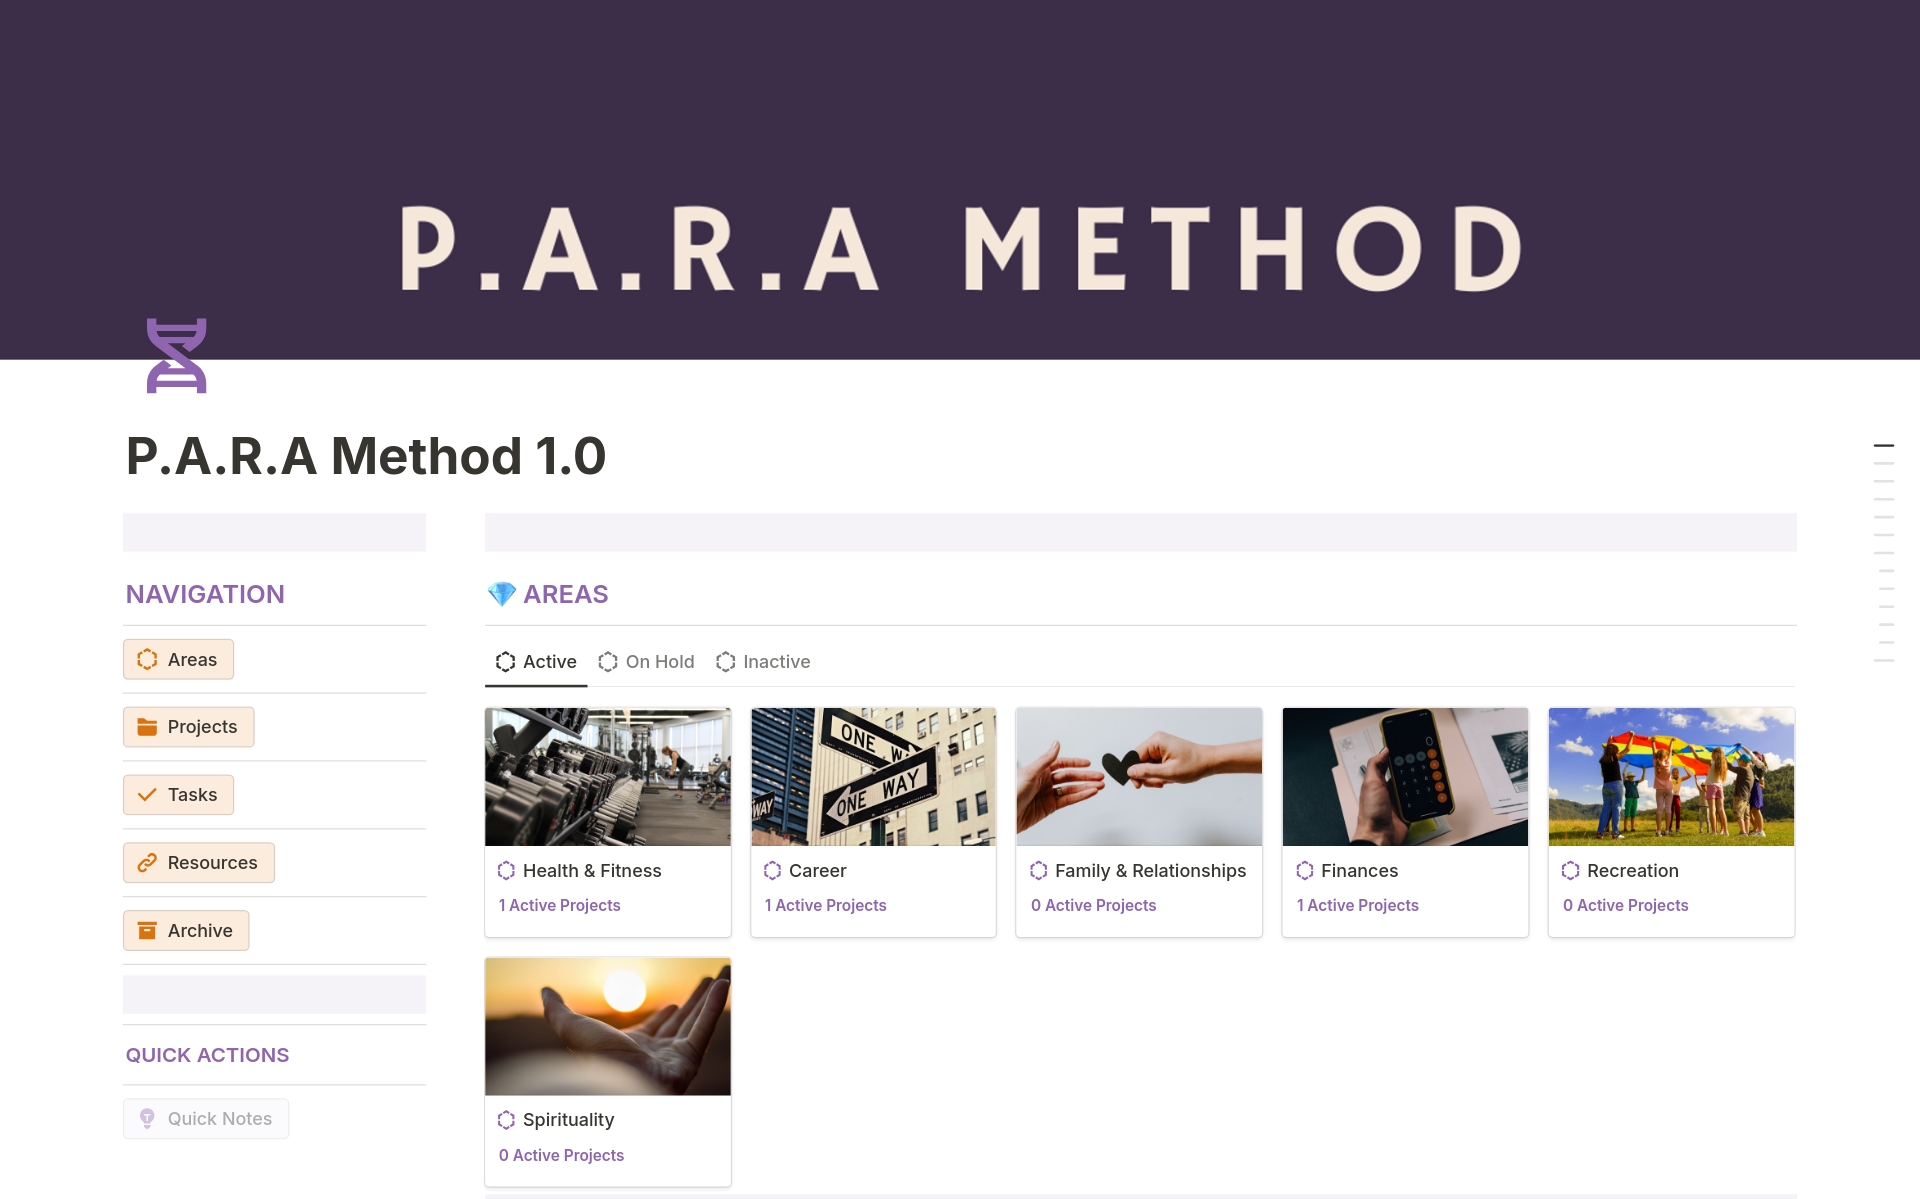 P.A.R.A Method Structure: Utilize the Projects, Areas, Resources, and Archives framework to categorize and prioritize your digital assets.